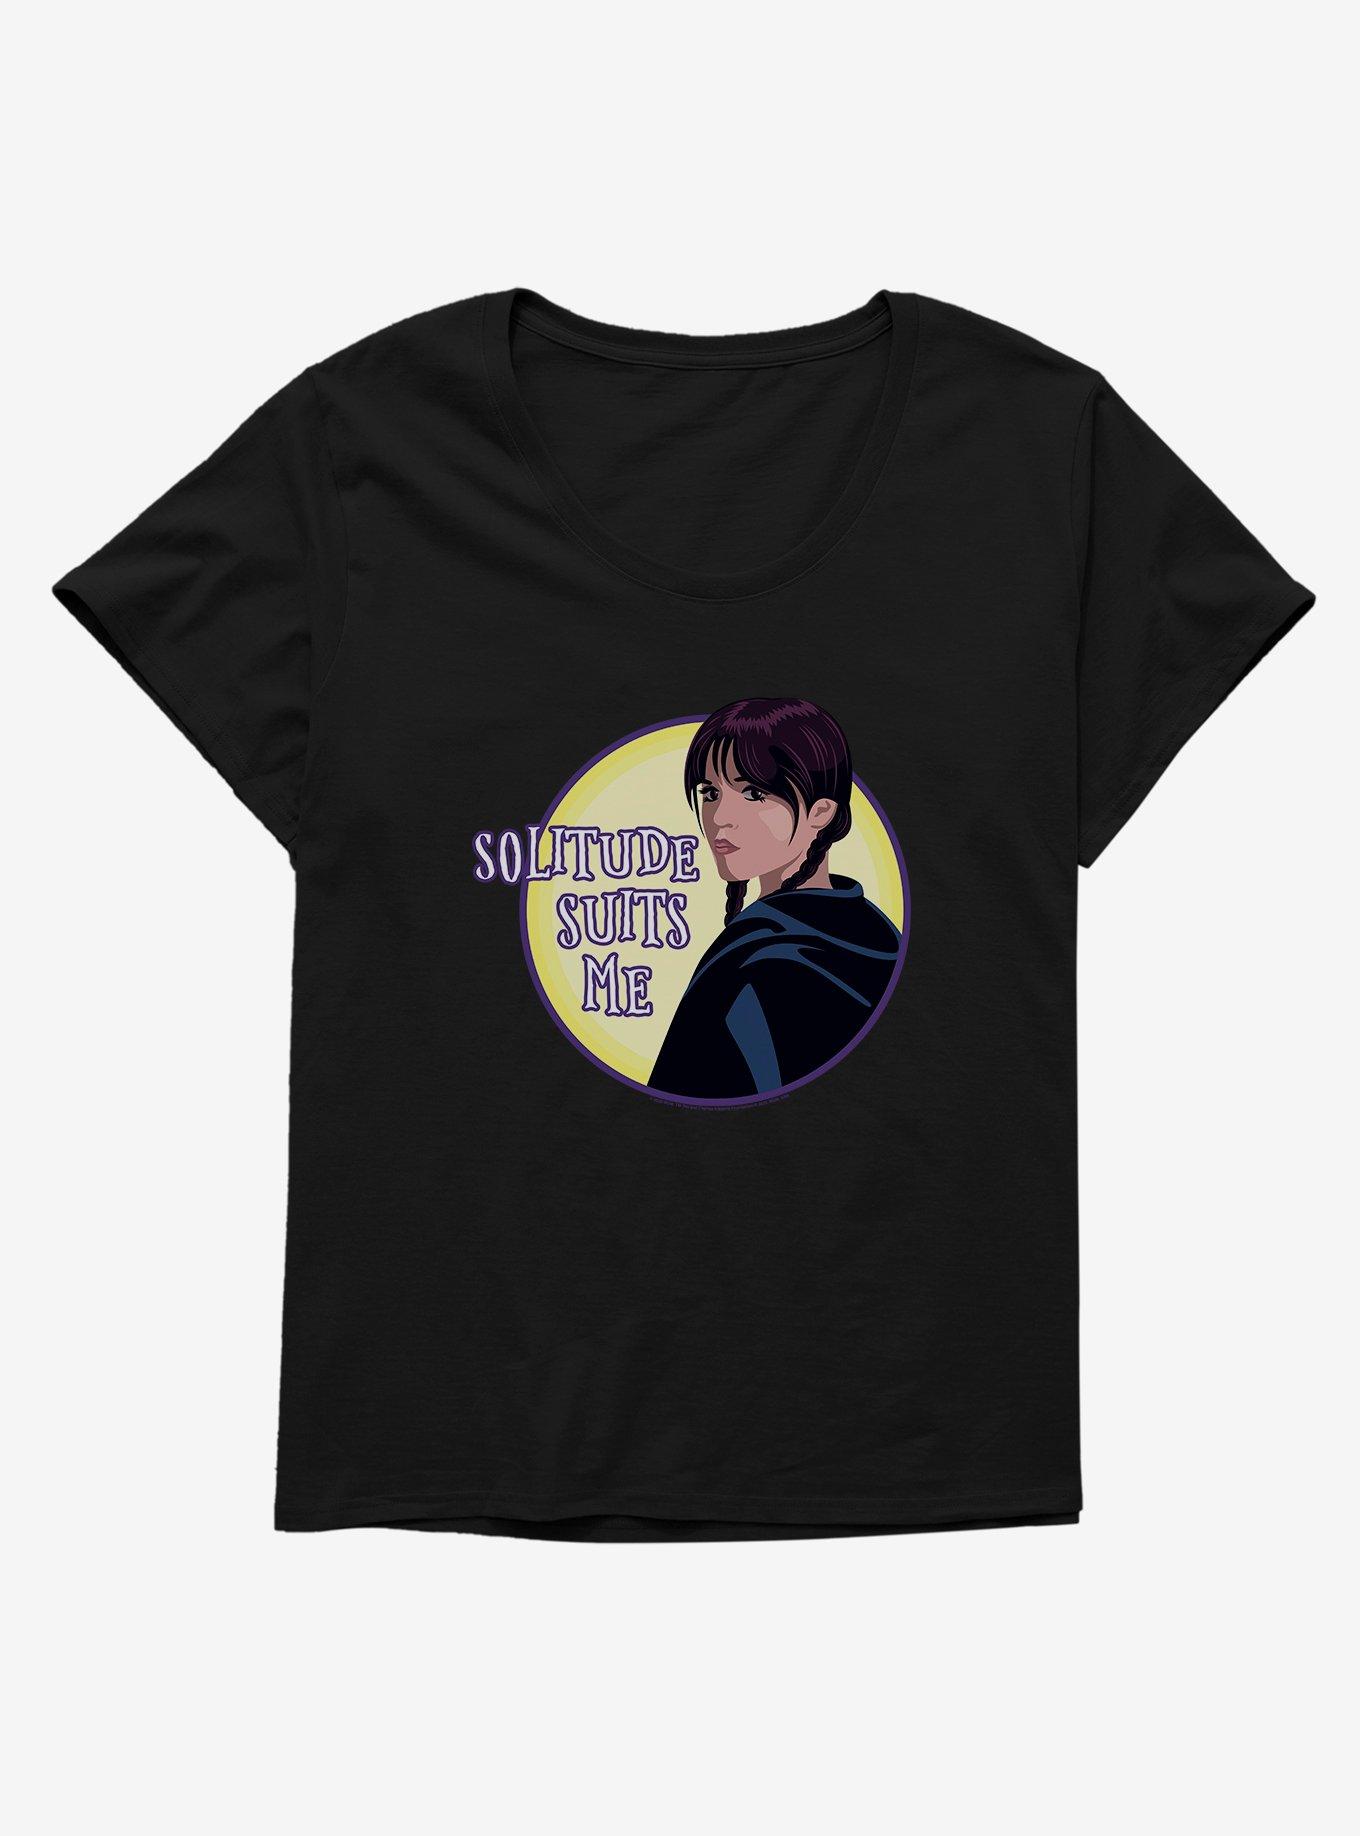 Wednesday TV Series Solitude Suits Me Womens T-Shirt Plus Size